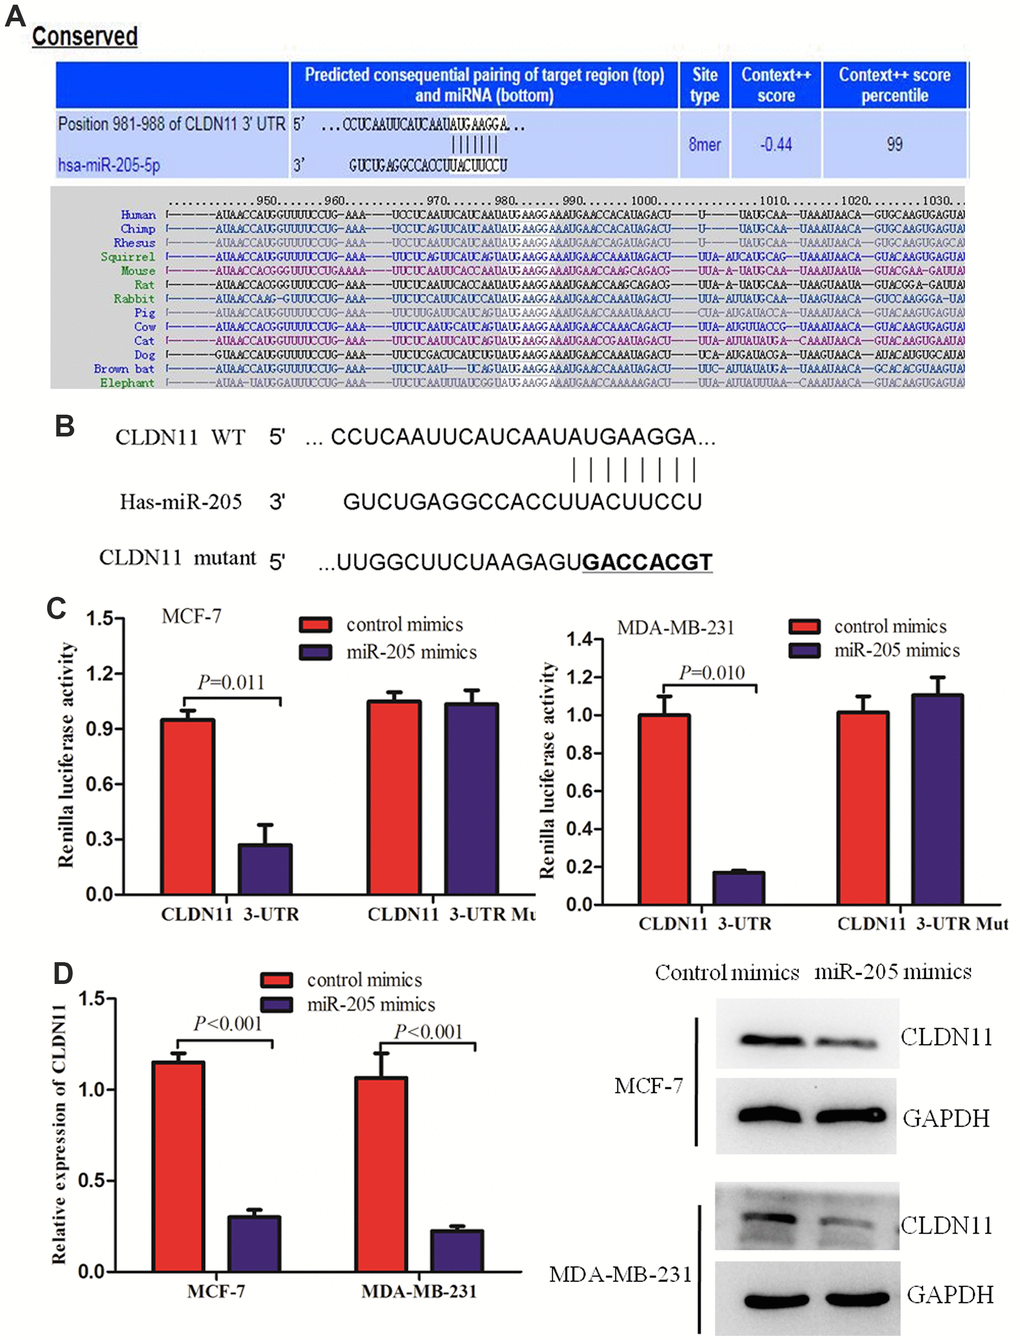 CLDN11 was a direct target of miR-205. (A, B) The predicted binding sites of miR-205 at the 3’-UTR of CLDN11 using bioinformatics (B, C) Overexpression of miR-205 reduced the luciferase activity of wild-type 3’-UTR of CLDN11 in MCF-7 and MDA-MB-231 cells. (D) Over-expression of miR-205 suppressed both the mRNA and protein levels of CLDN11 in both MCF7 and MDA-MB-231 cells.